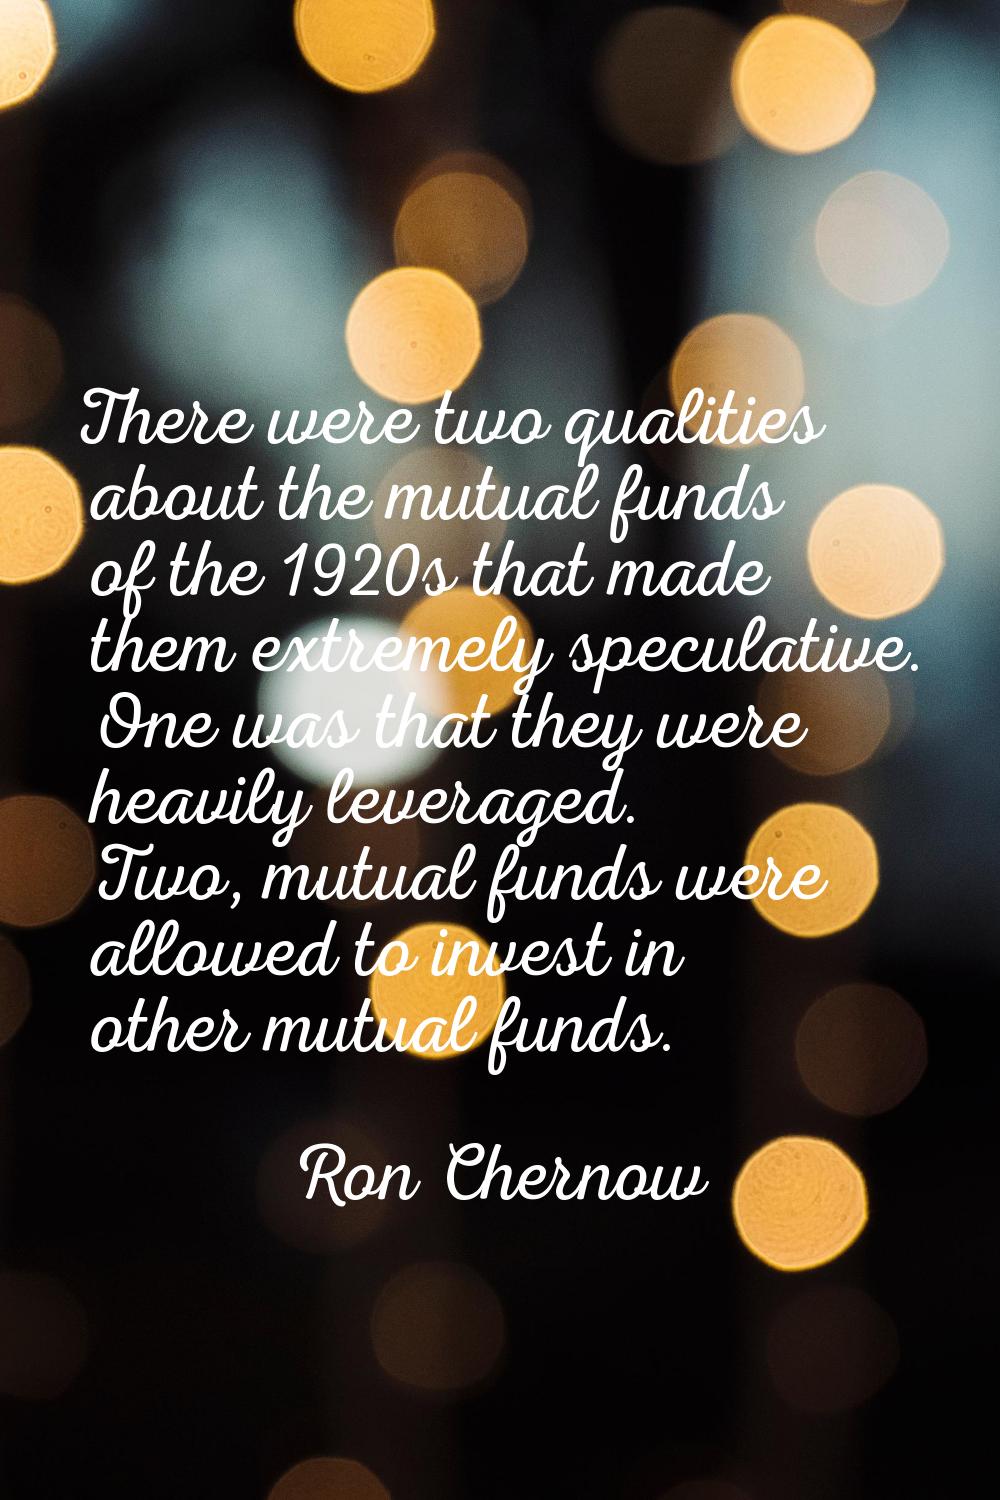 There were two qualities about the mutual funds of the 1920s that made them extremely speculative. 